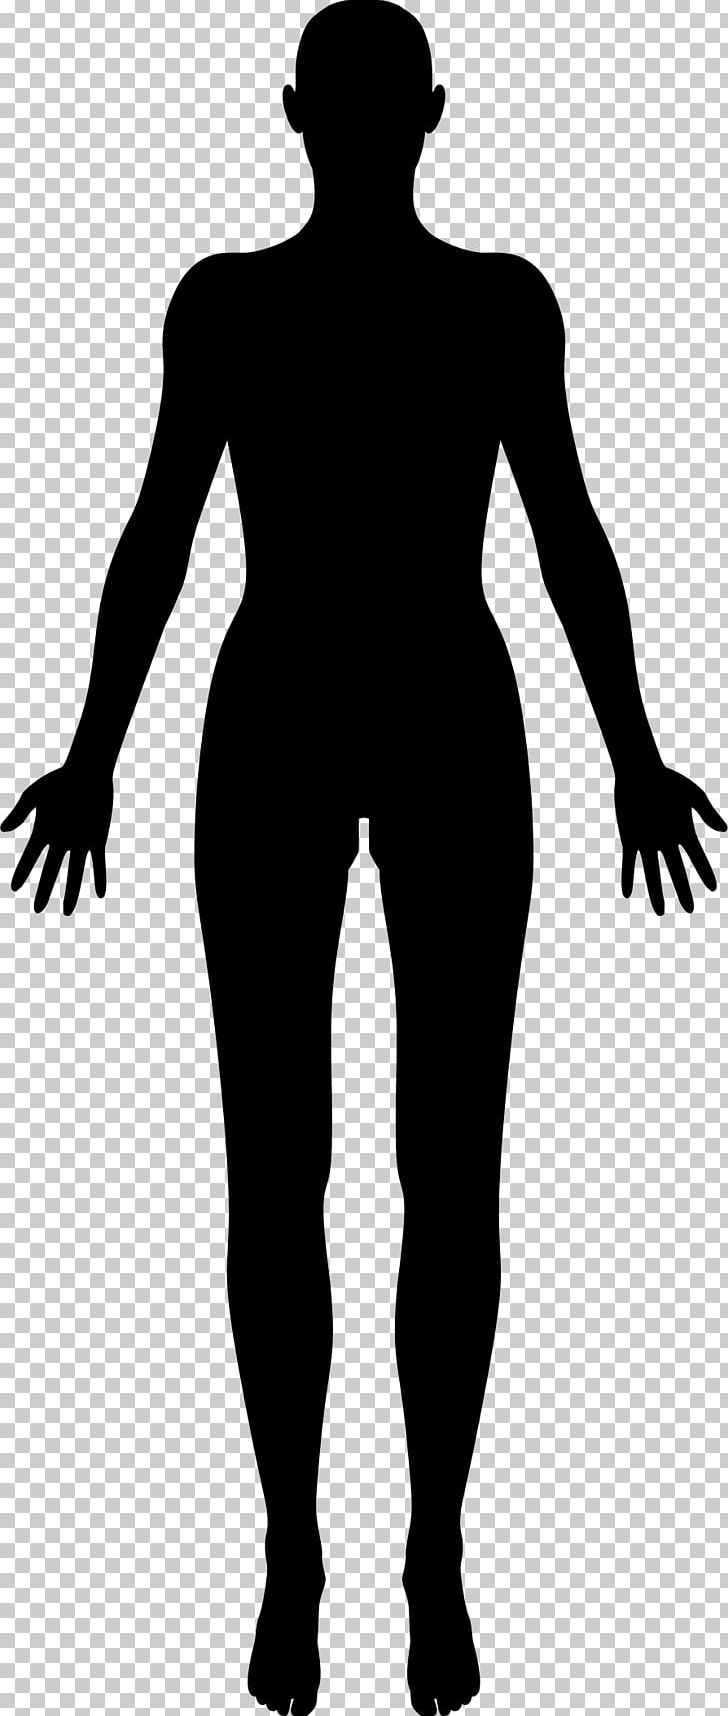 Female Body Shape Human Body Silhouette PNG, Clipart.